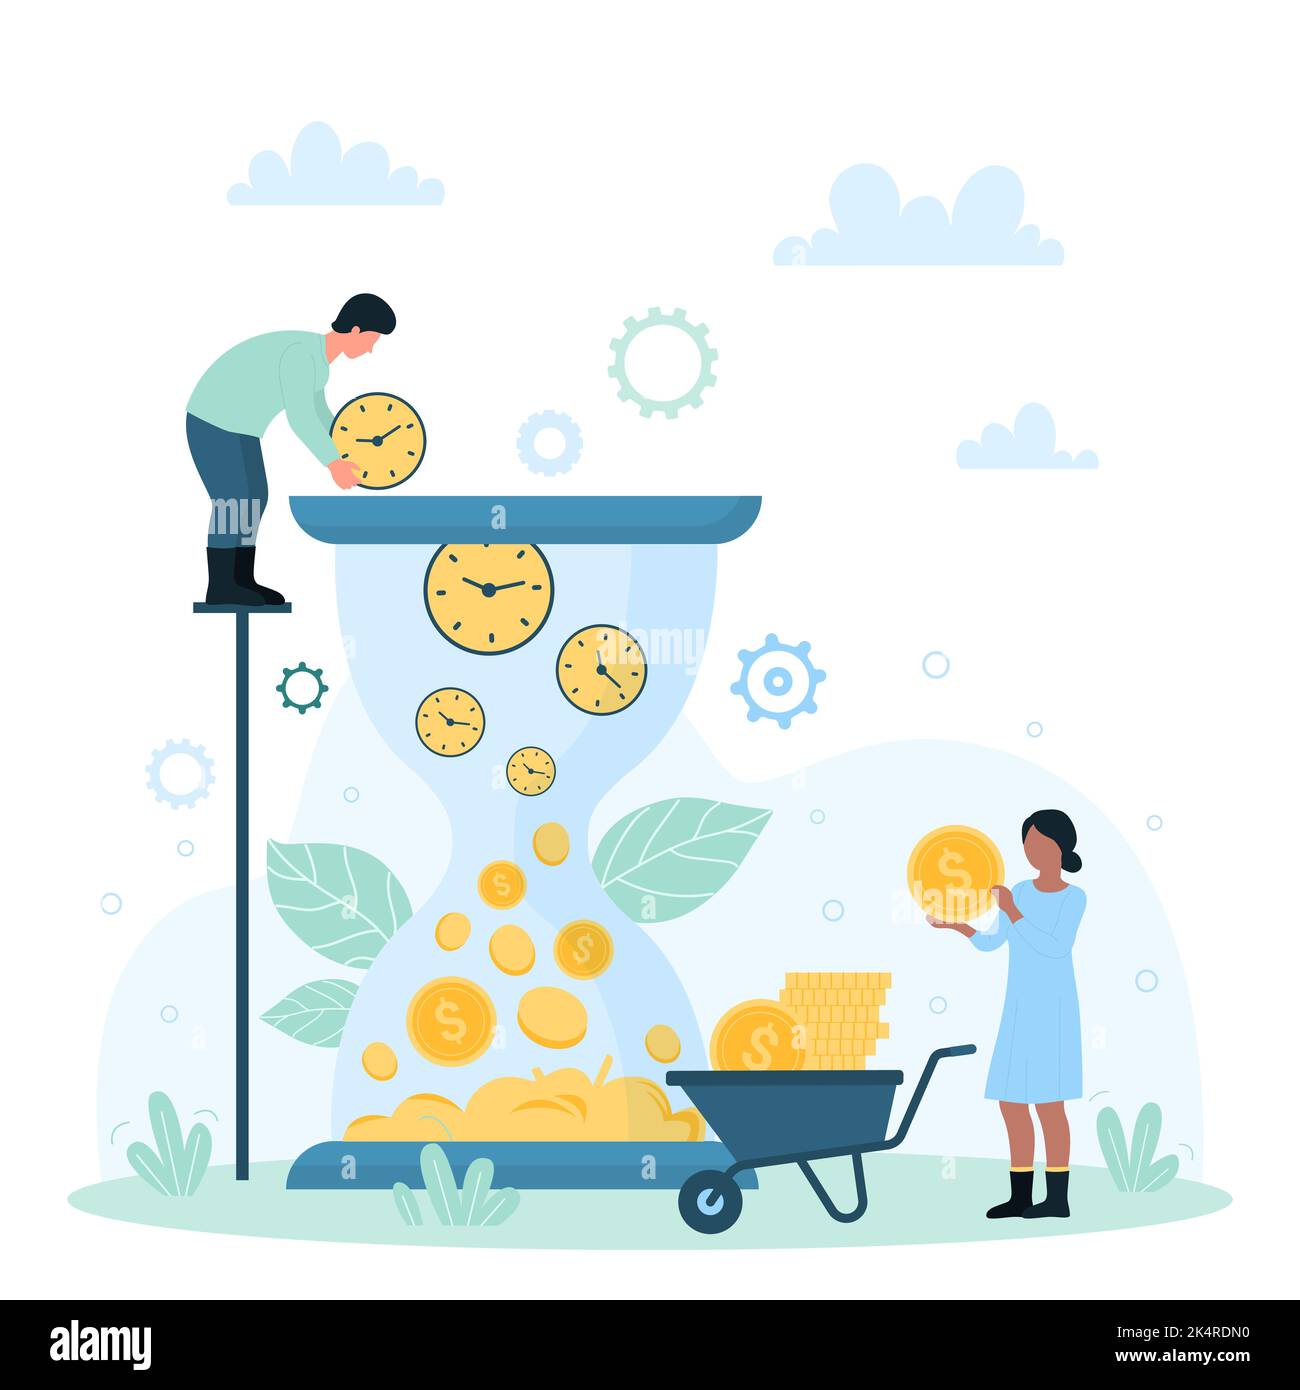 Money is time concept, success investment, strategy to maximize and multiply profit vector illustration. Cartoon rich tiny people throw clocks in hourglass, make golden dollar coins for wealth growth Stock Vector